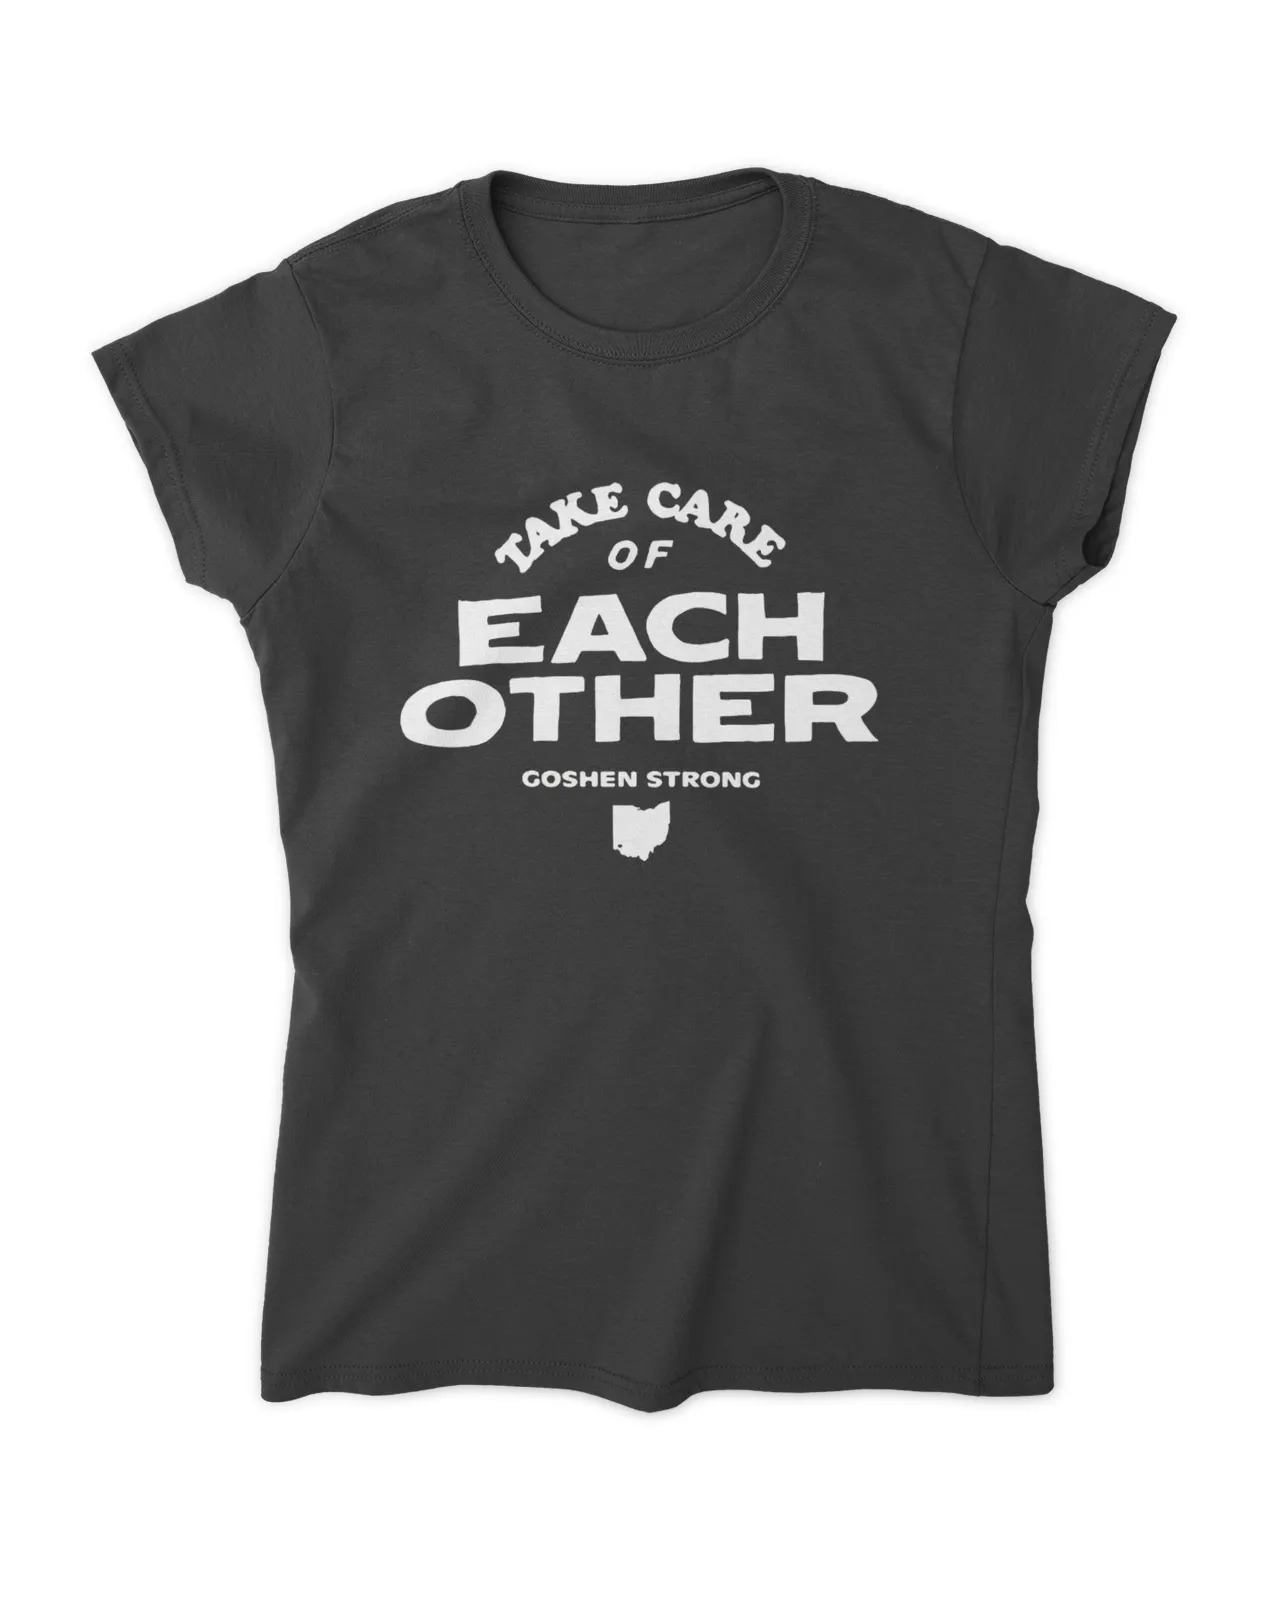 Take Care Of Each Other Shirt - #goshenstrong